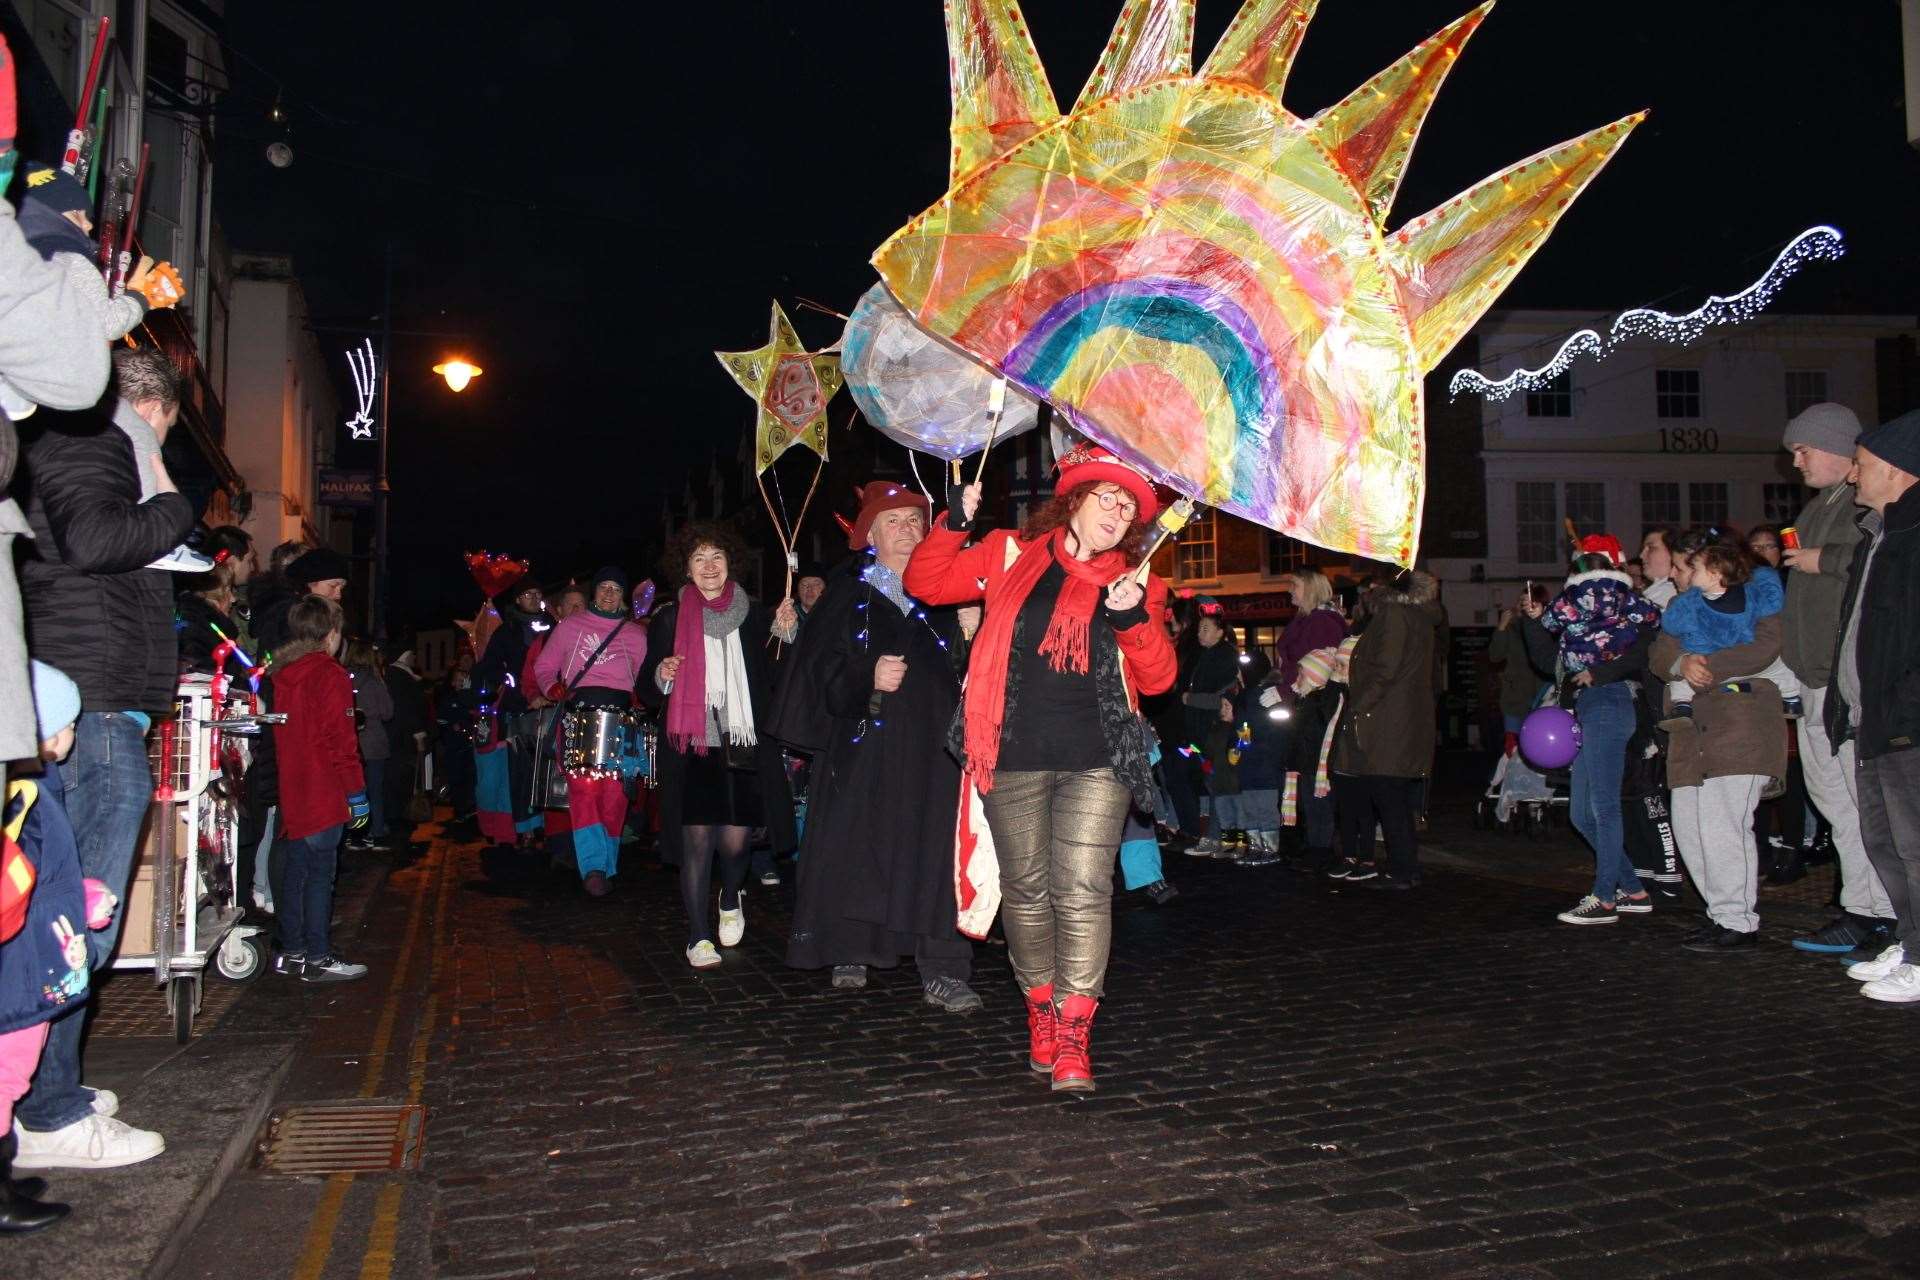 Chris Reed of Big Fish Arts leads the Sheppey lantern parade at the Sheerness Christmas lights switch-on